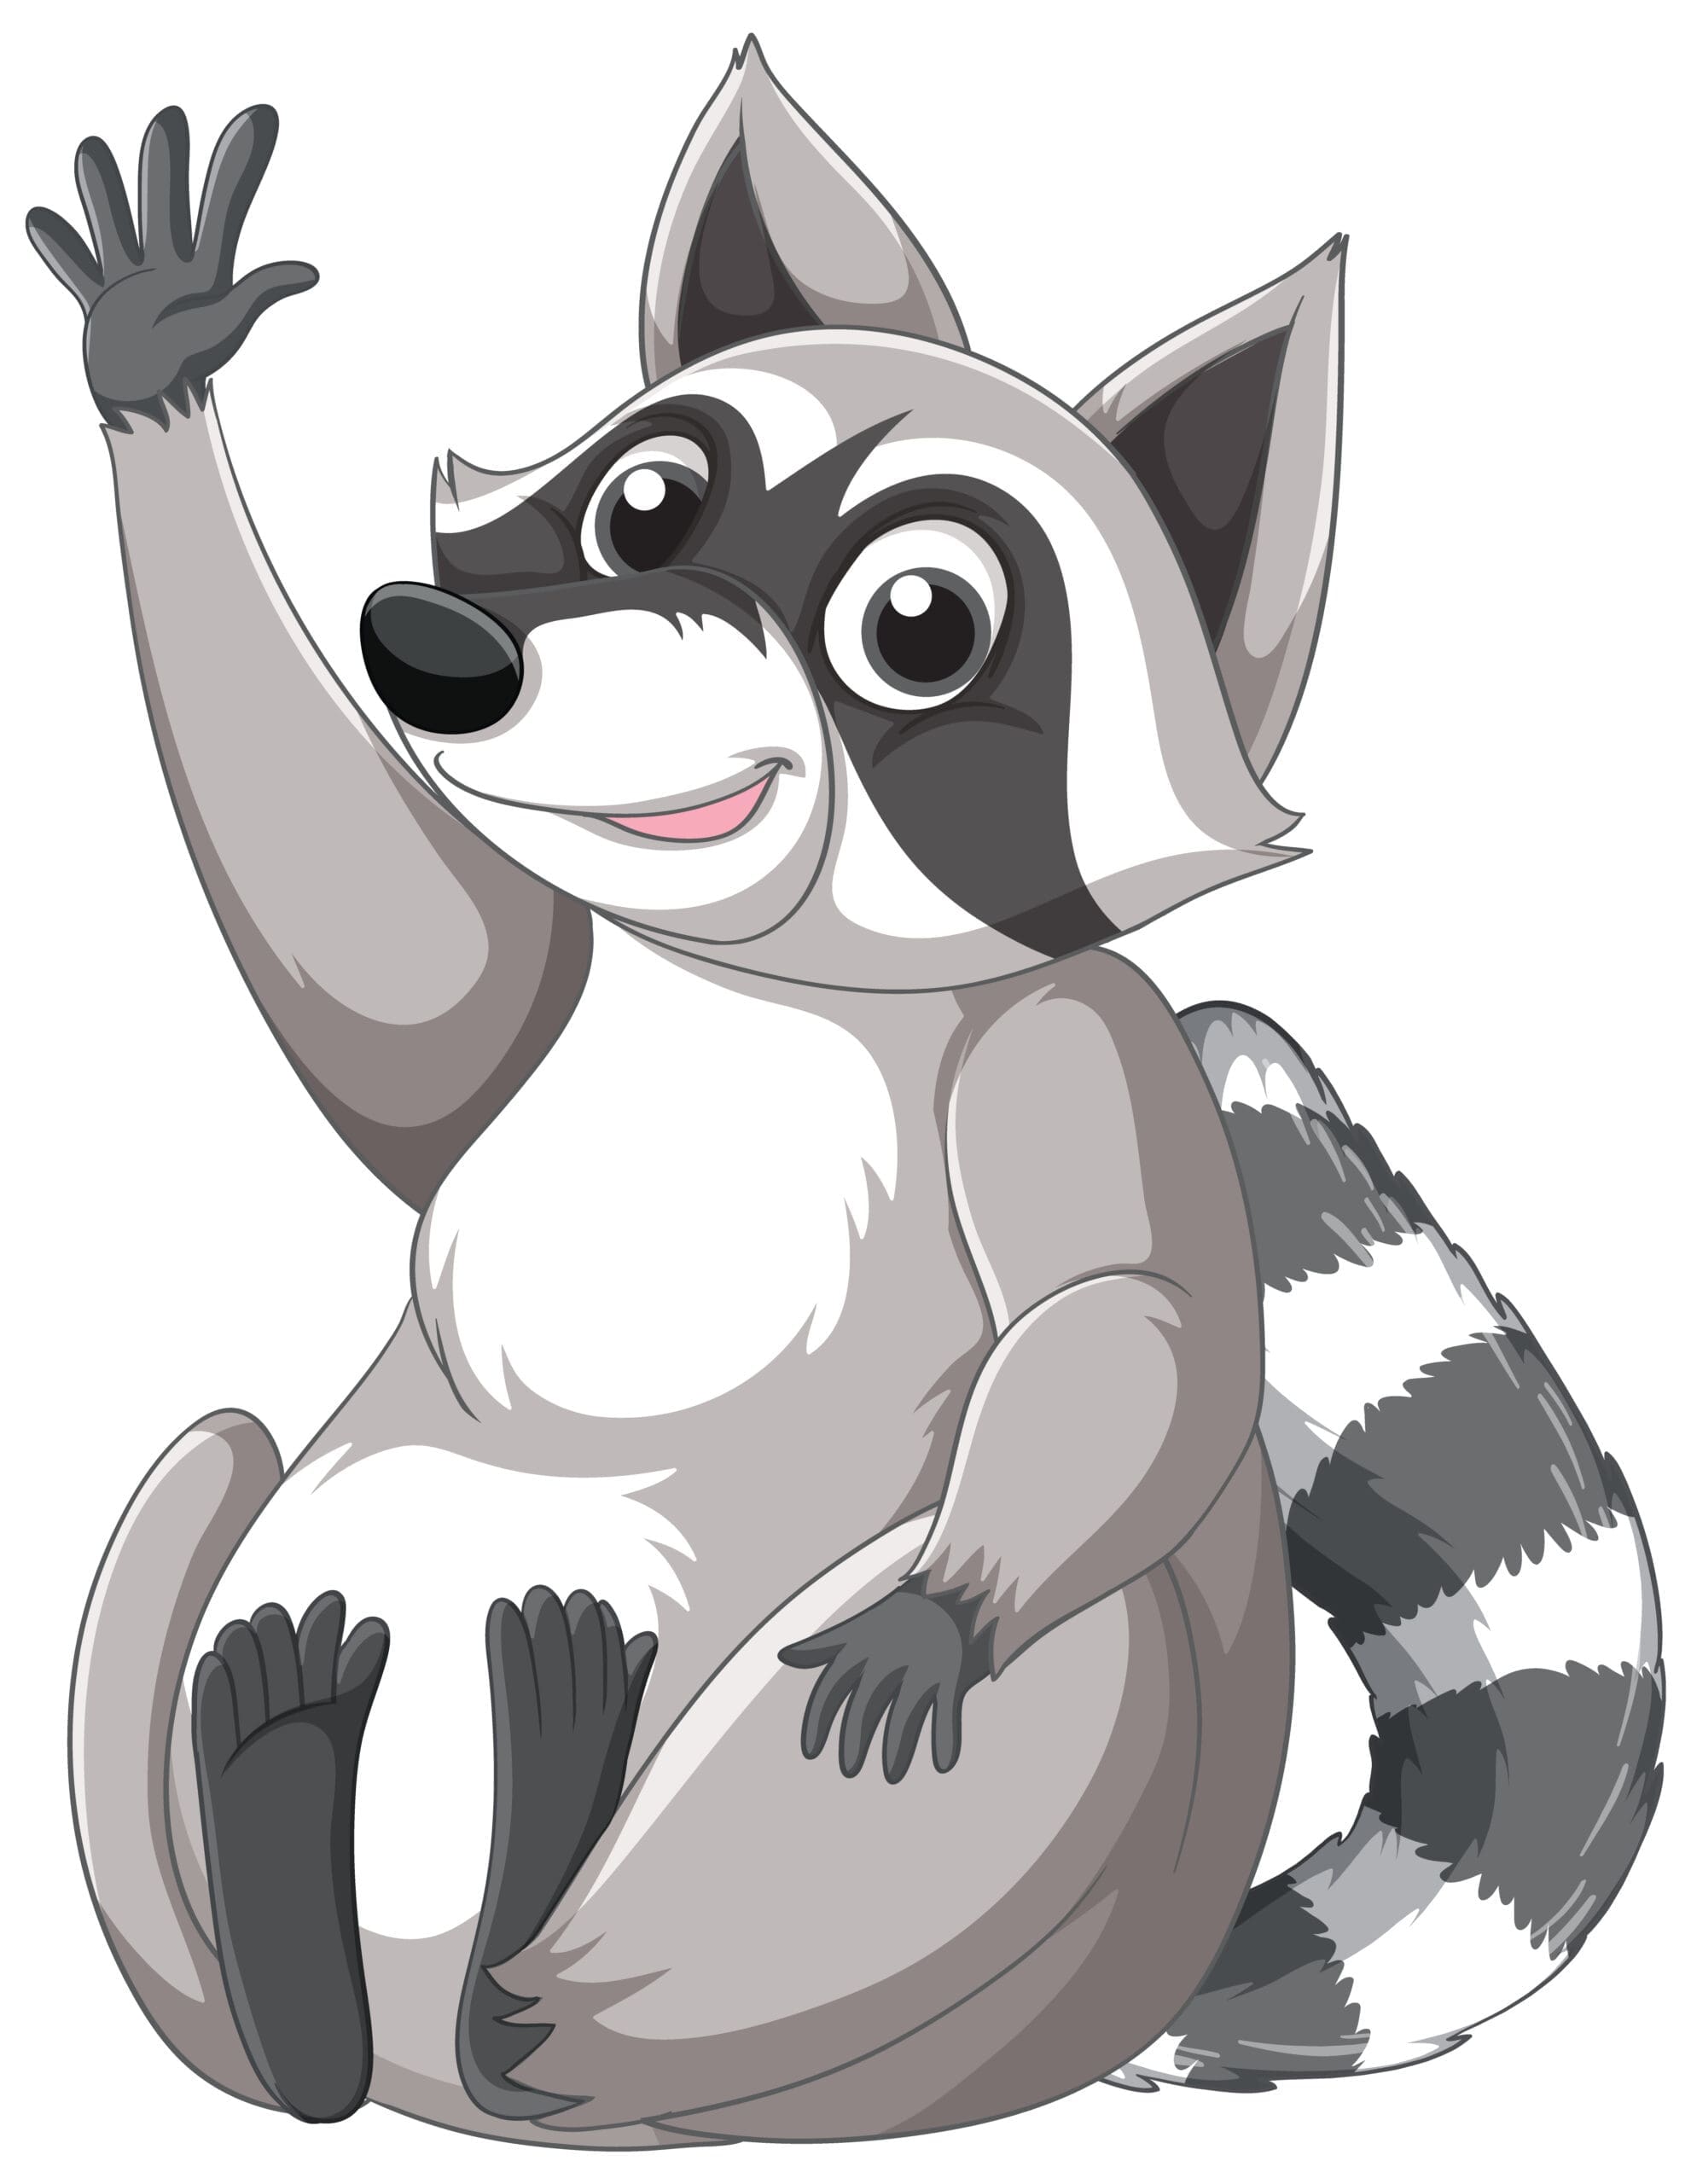 Cartoon graphic of a raccoon wearing glasses.